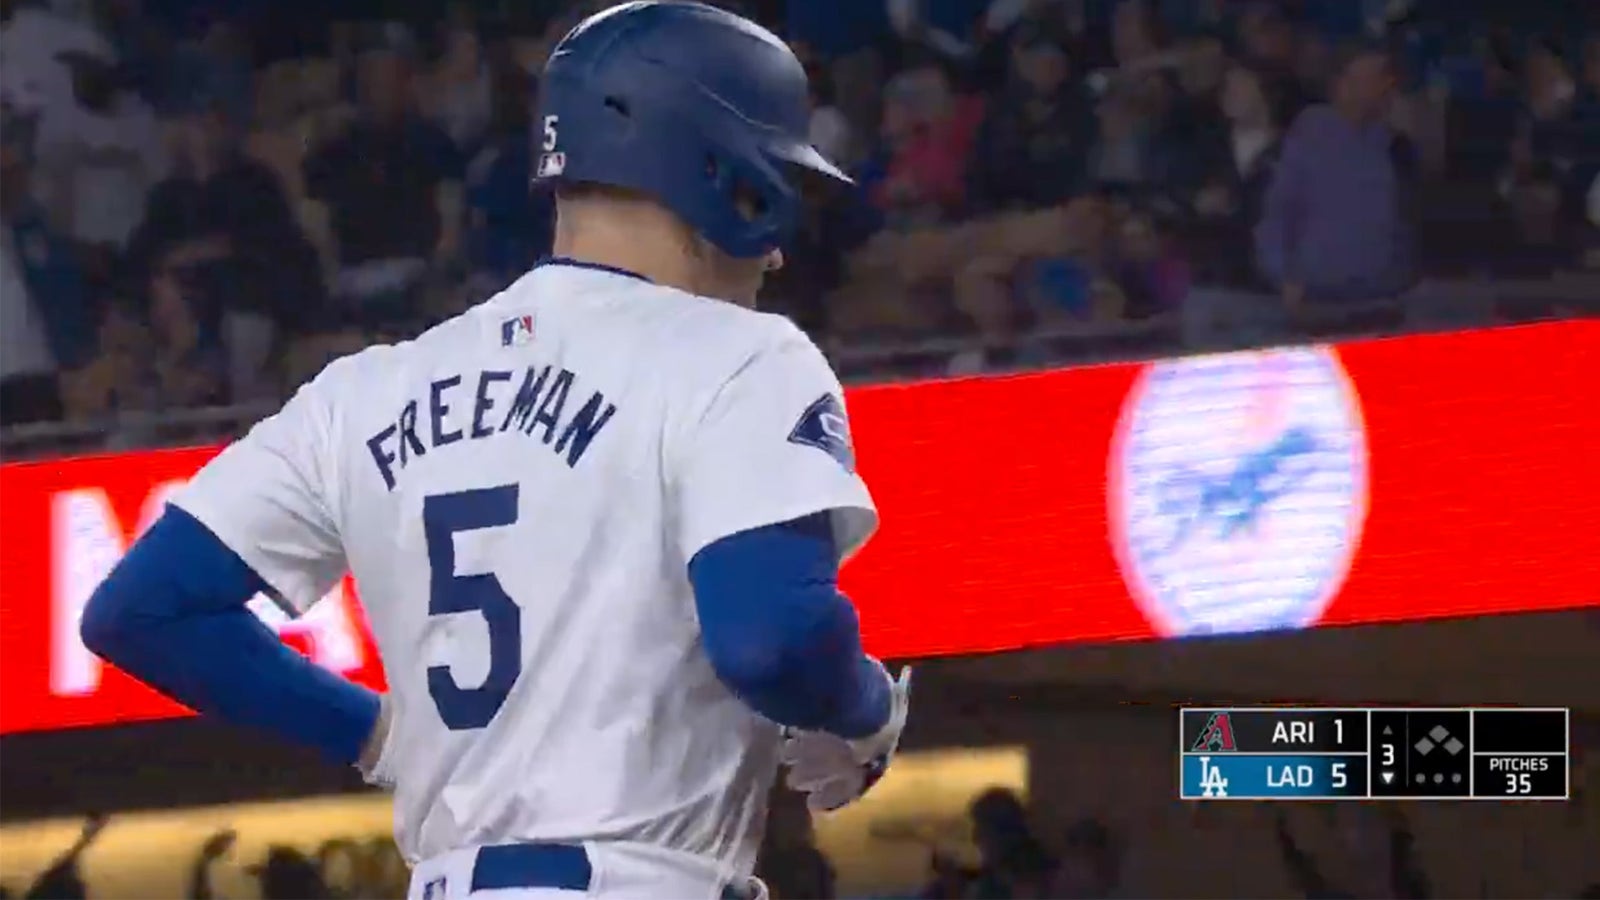 Freddie Freeman & Will Smith crank back-back homers, stretching the Dodgers' lead to 6-1 over the D-backs.